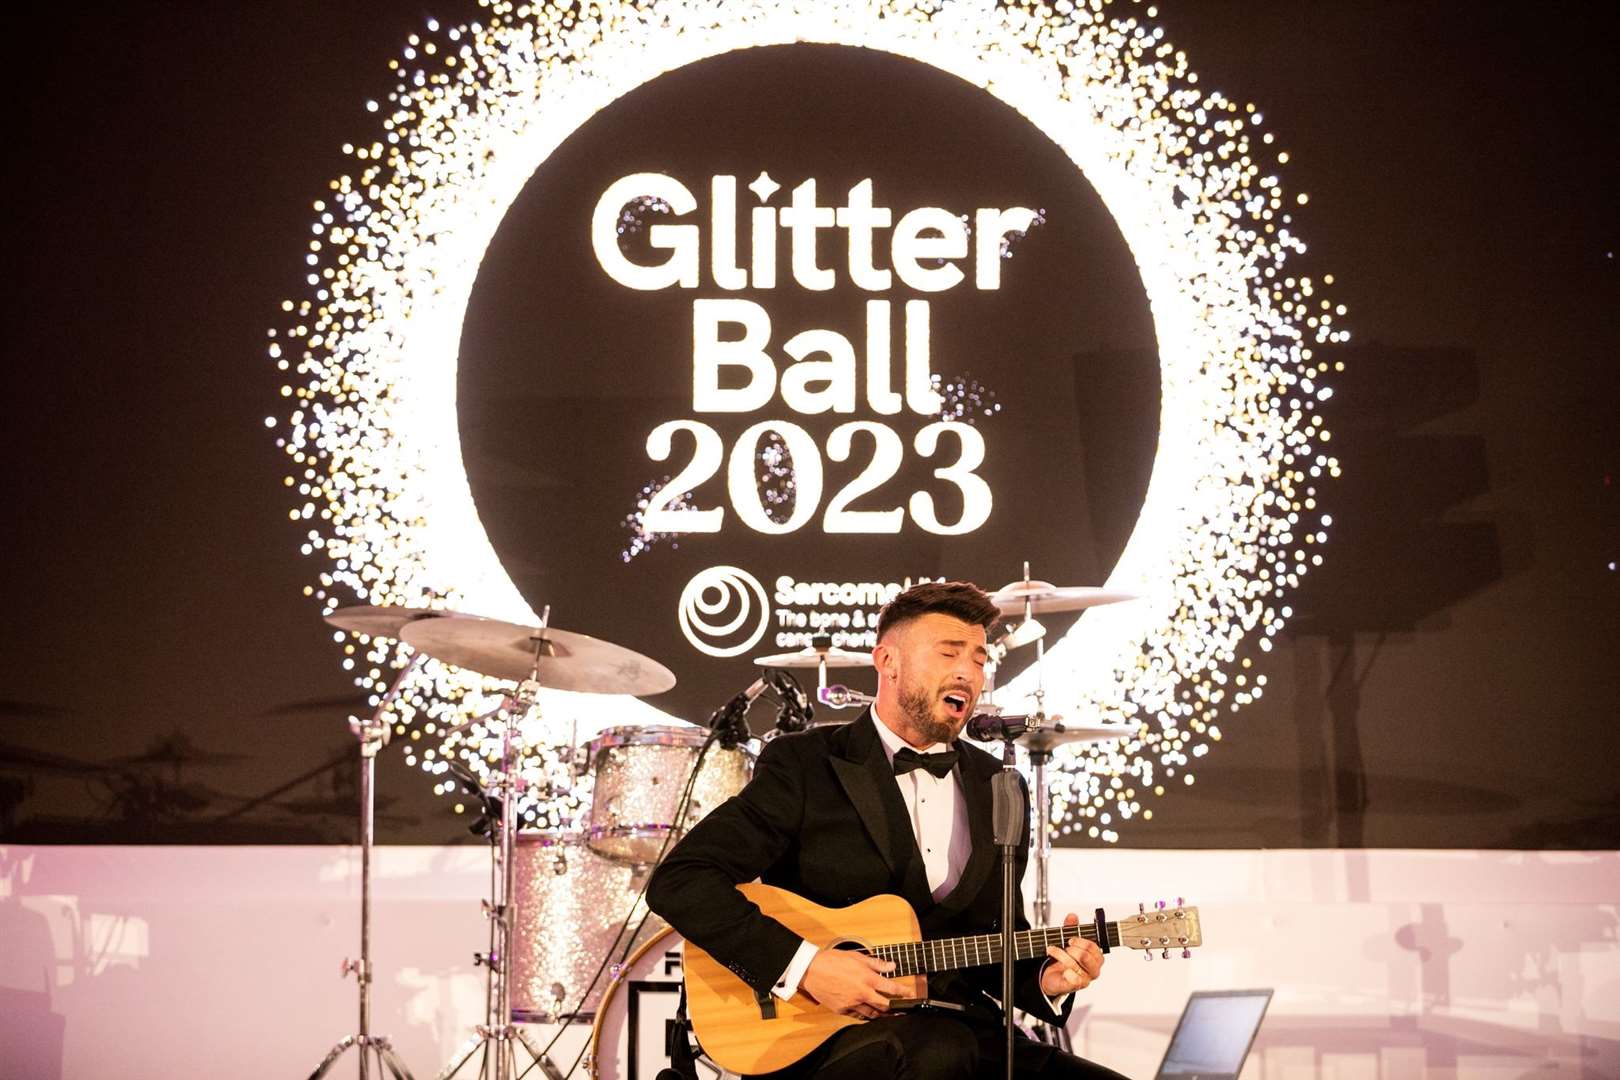 Jake Quickenden performed at Sarcoma UK’s Glitter Ball 2023 in March (Ian Randall/Sarcoma UK/PA)